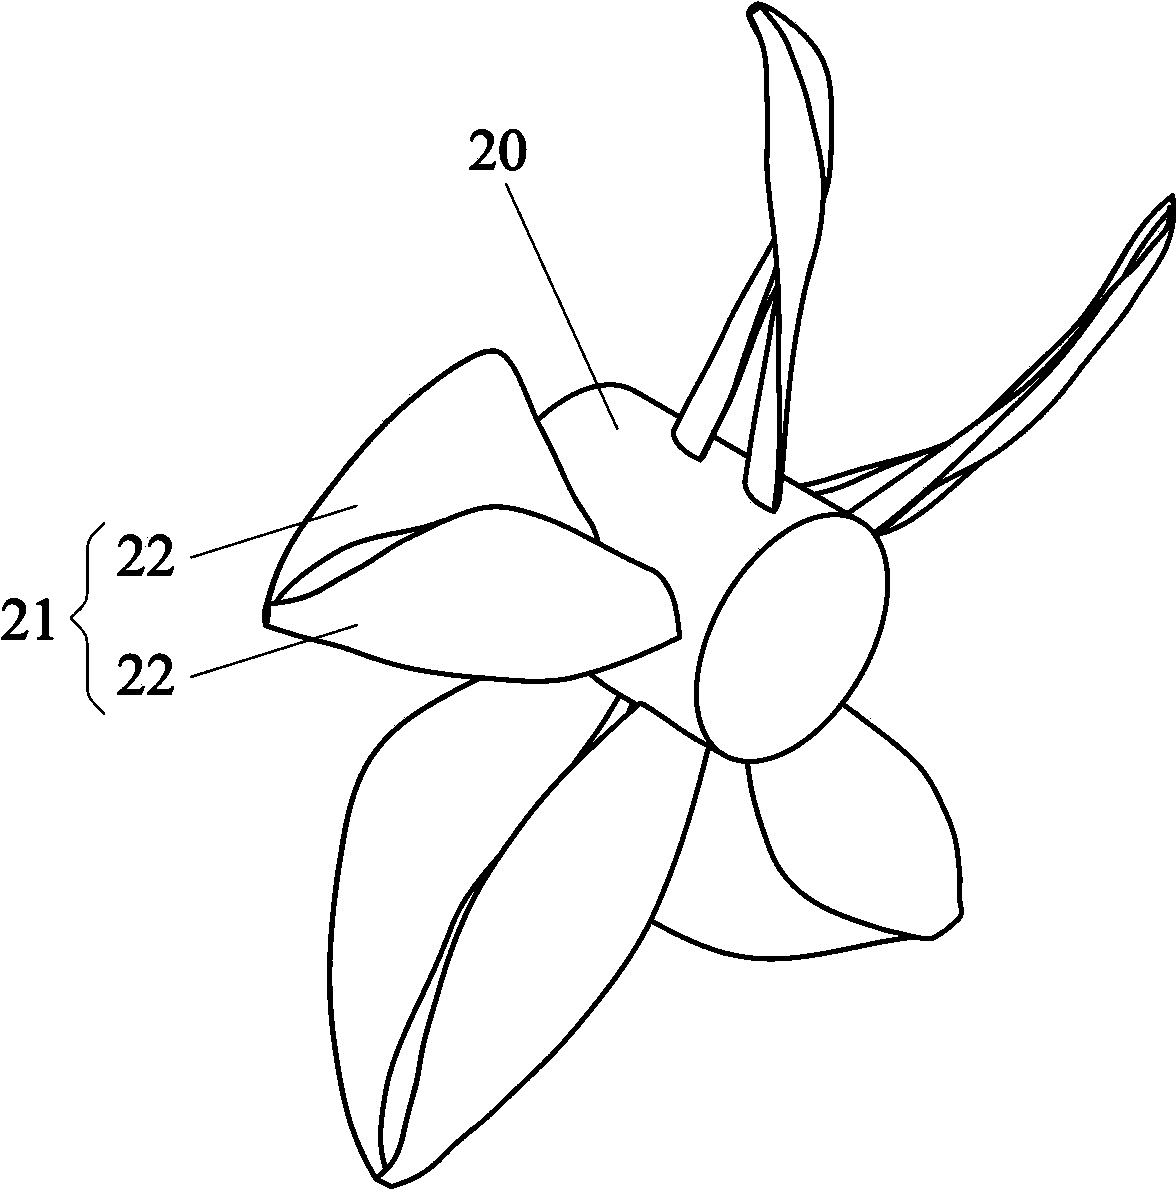 Combined propeller blade structure